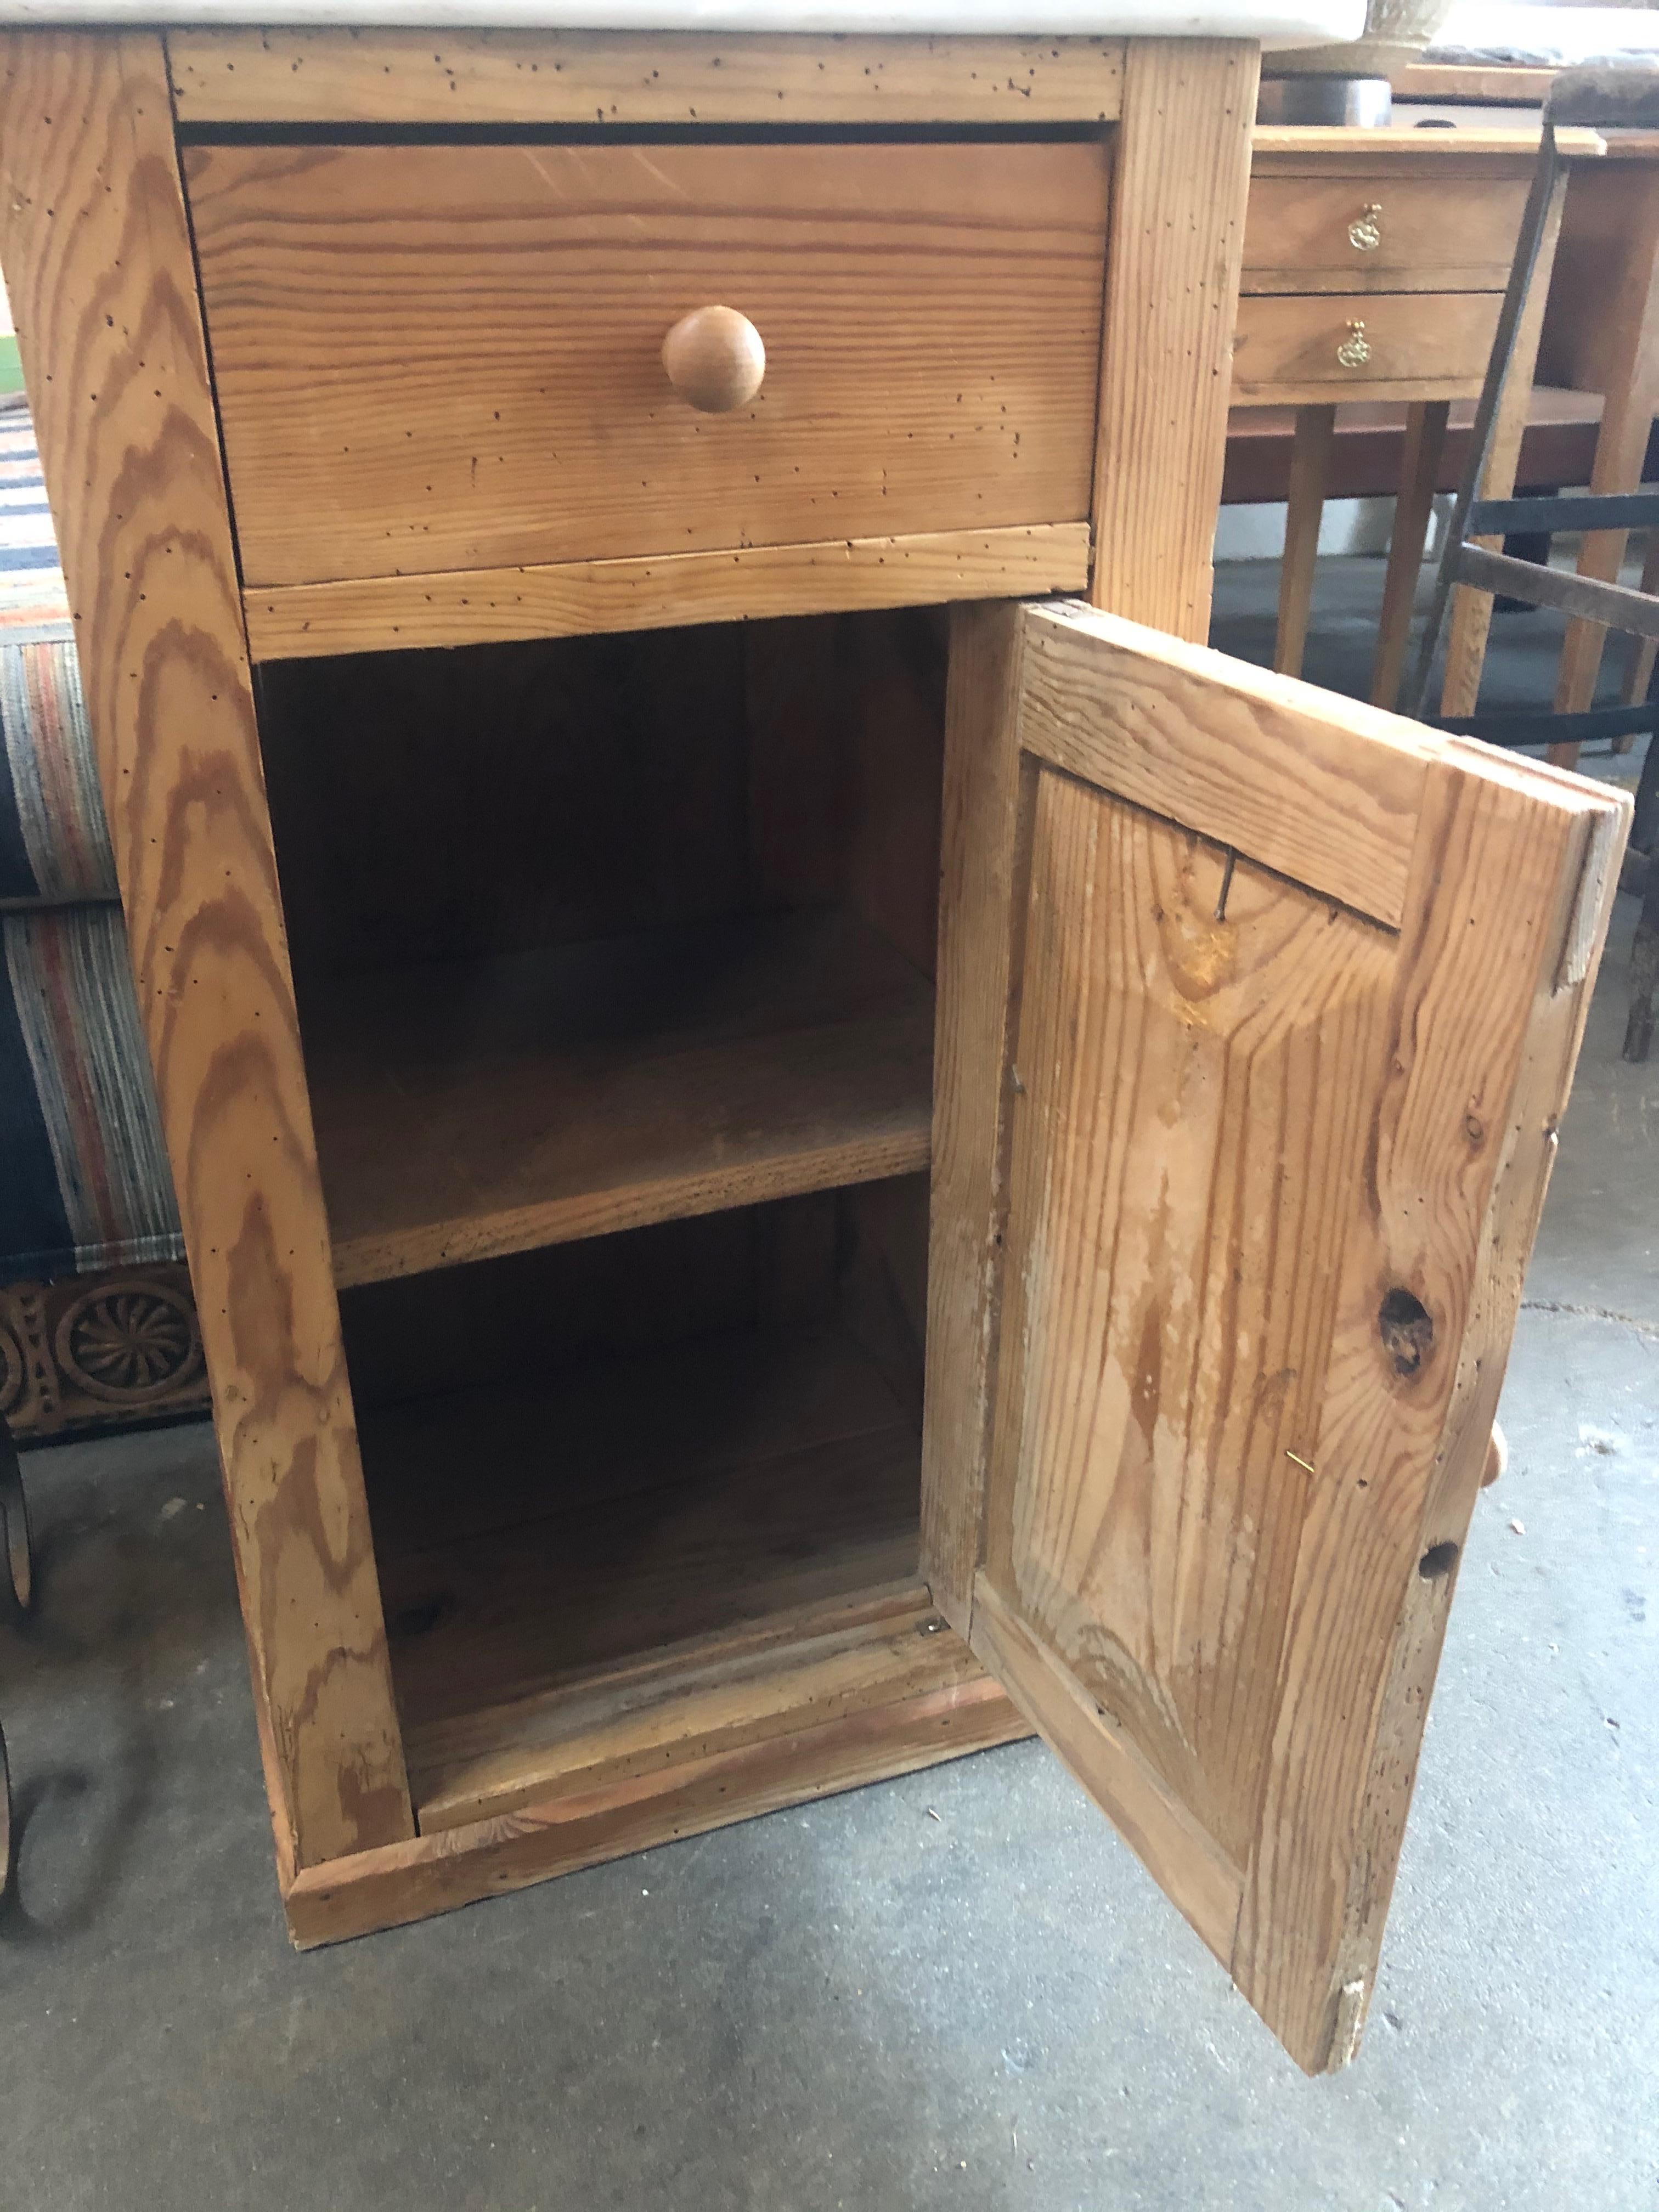 Rustic side table with white marble top. Small slide out drawer on top, and storage cabinet on the bottom. Natural wood unchanged from age. Would be great in a kitchen, bathroom, bedroom, living room, or office/retail space.
  